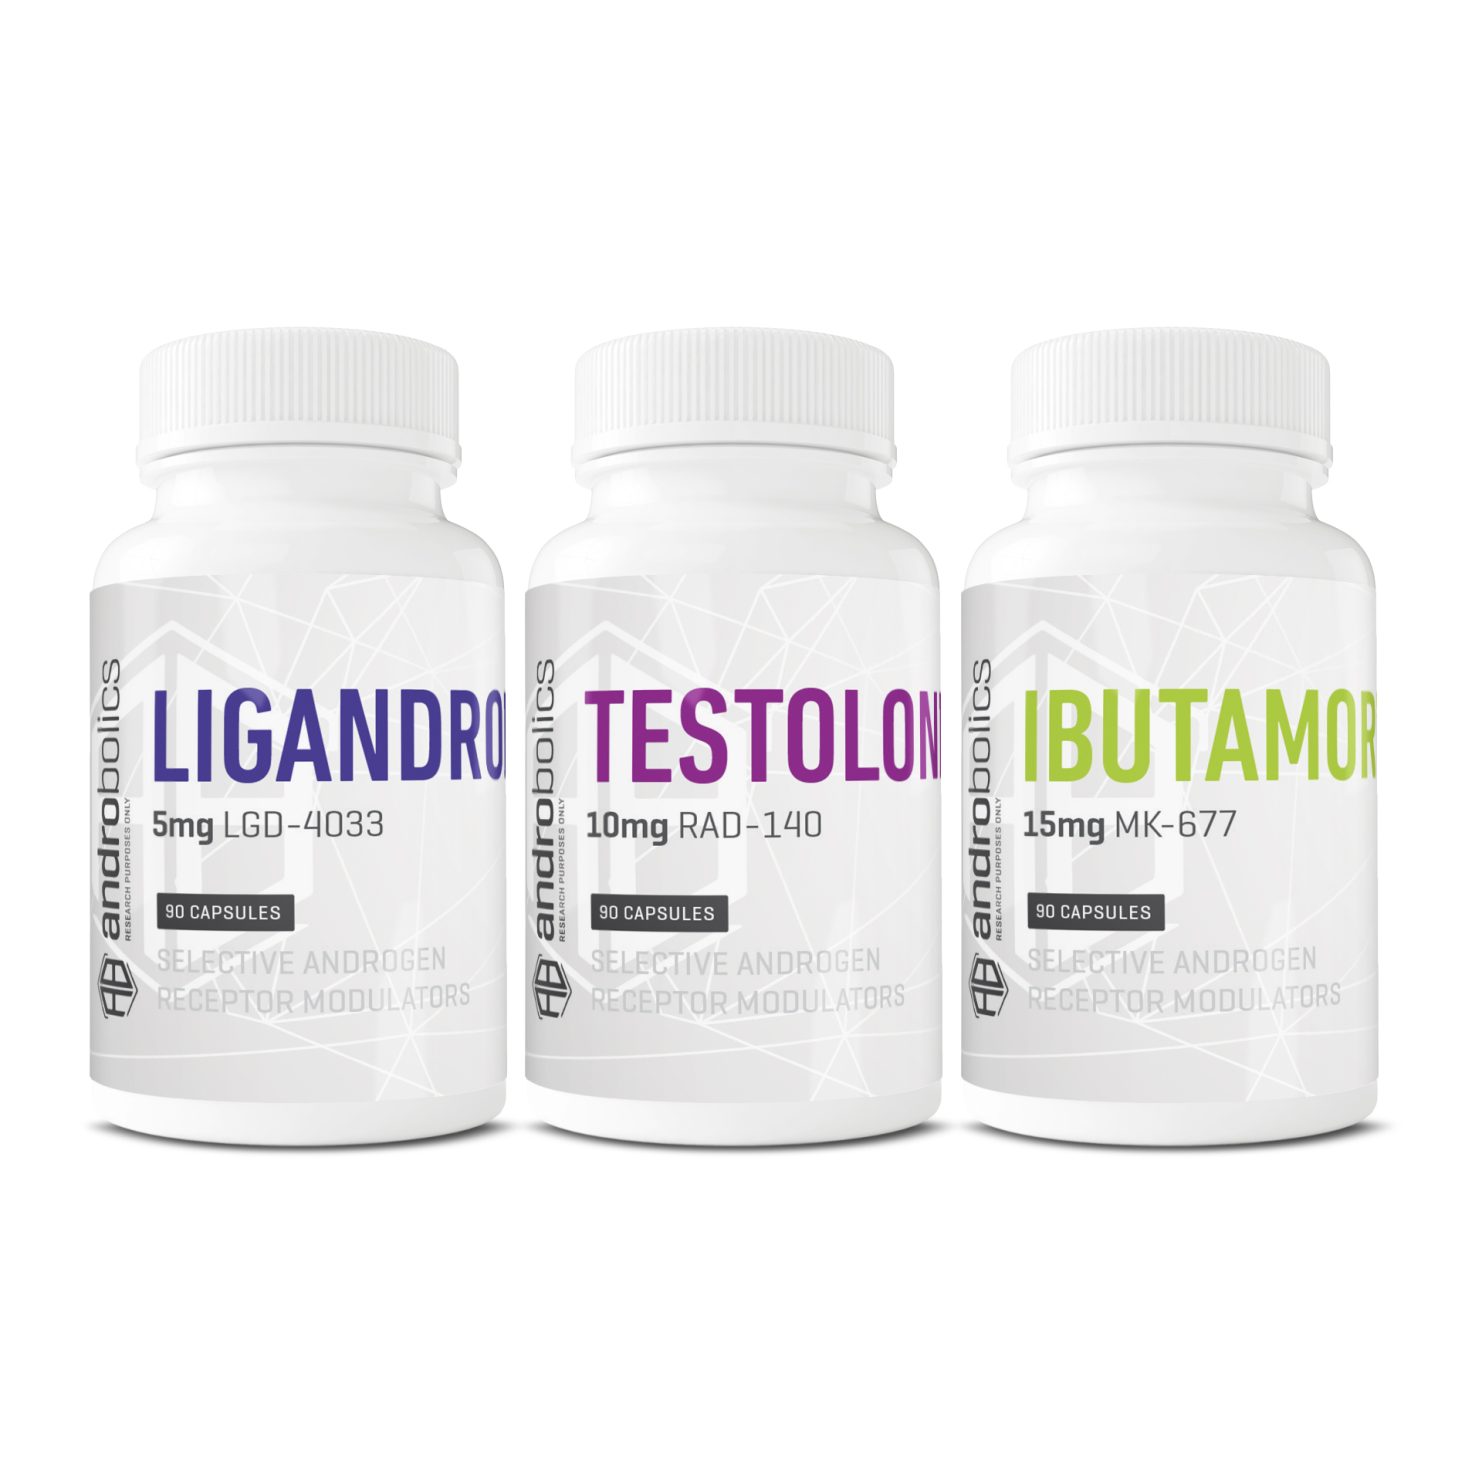 Advanced Muscle Mass SARMs Stack with Ligandrol, Ibutamoren, and Testolone bottles from Androbolics.